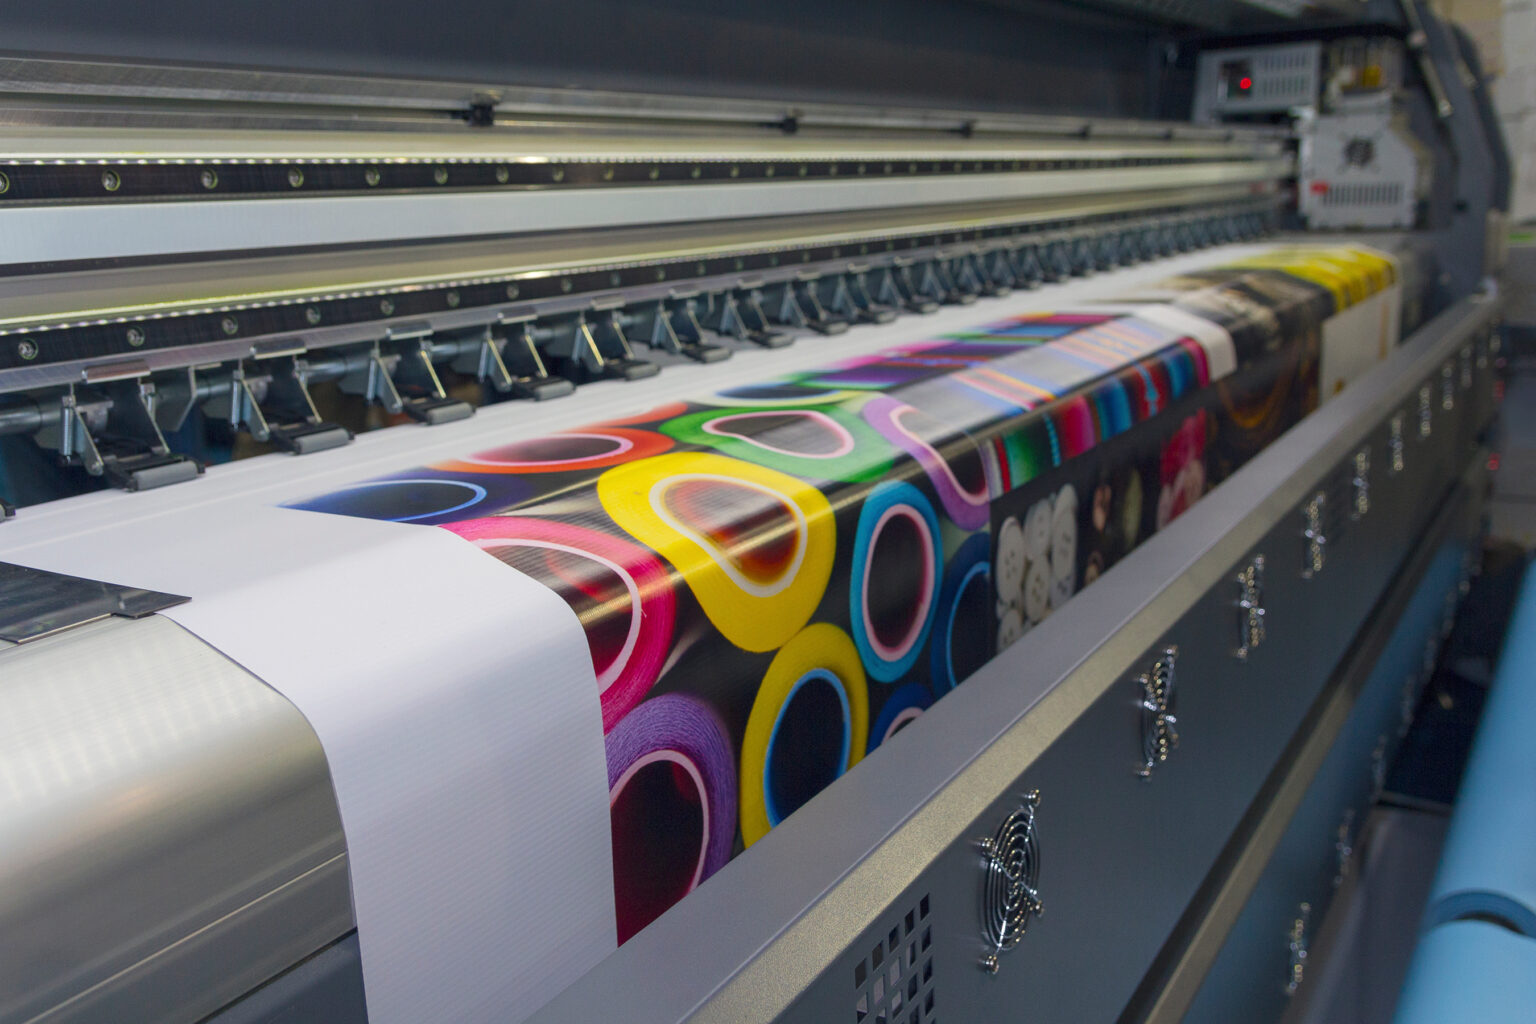 A large-scale printer prints a large multi-colored document.